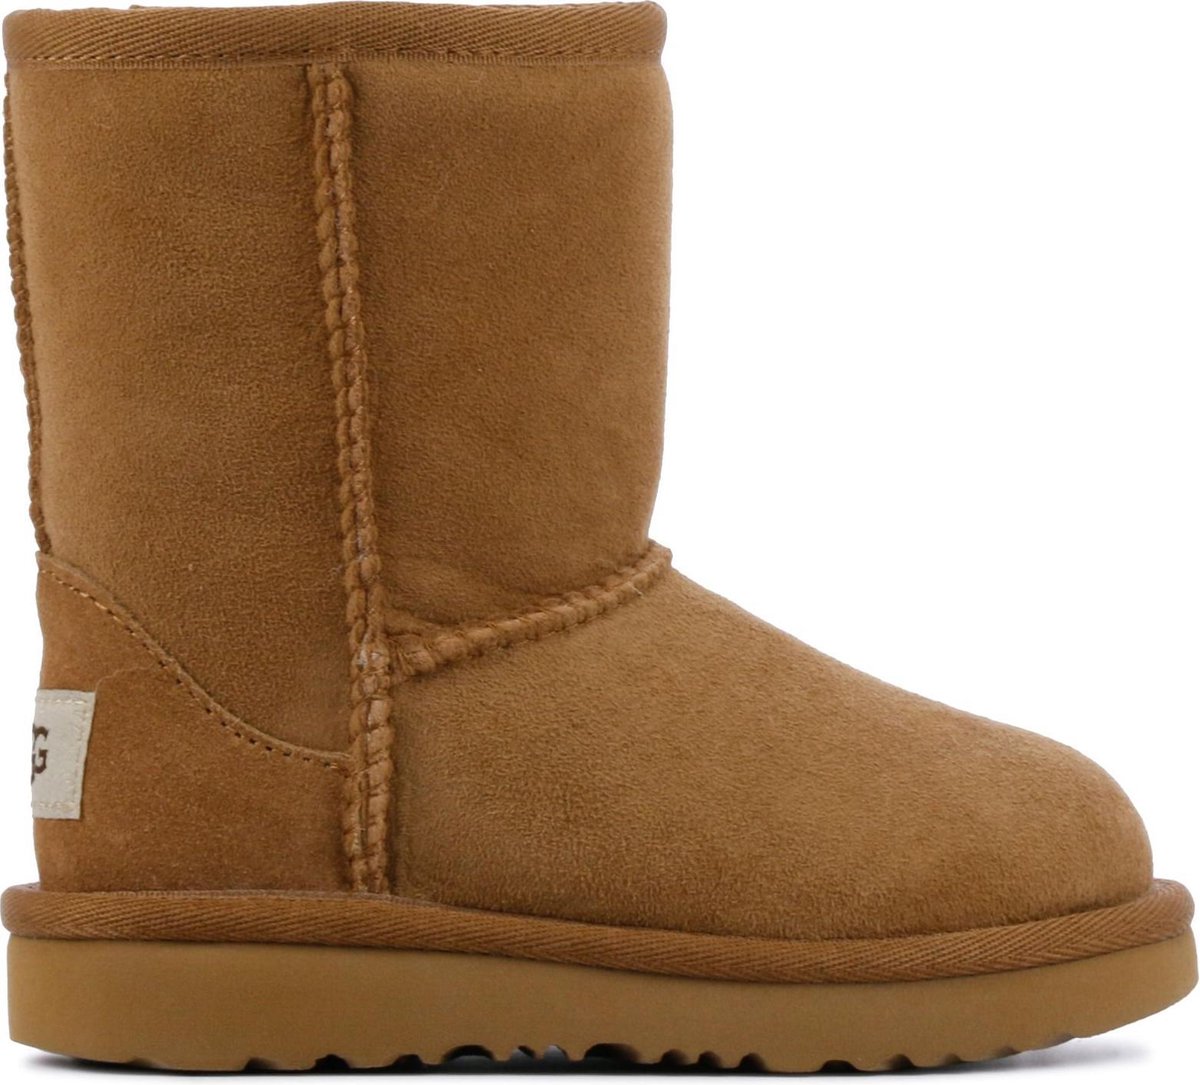 Kinder Uggs Maat 22 Best Sale, 47% OFF | www.angloamericancentre.it